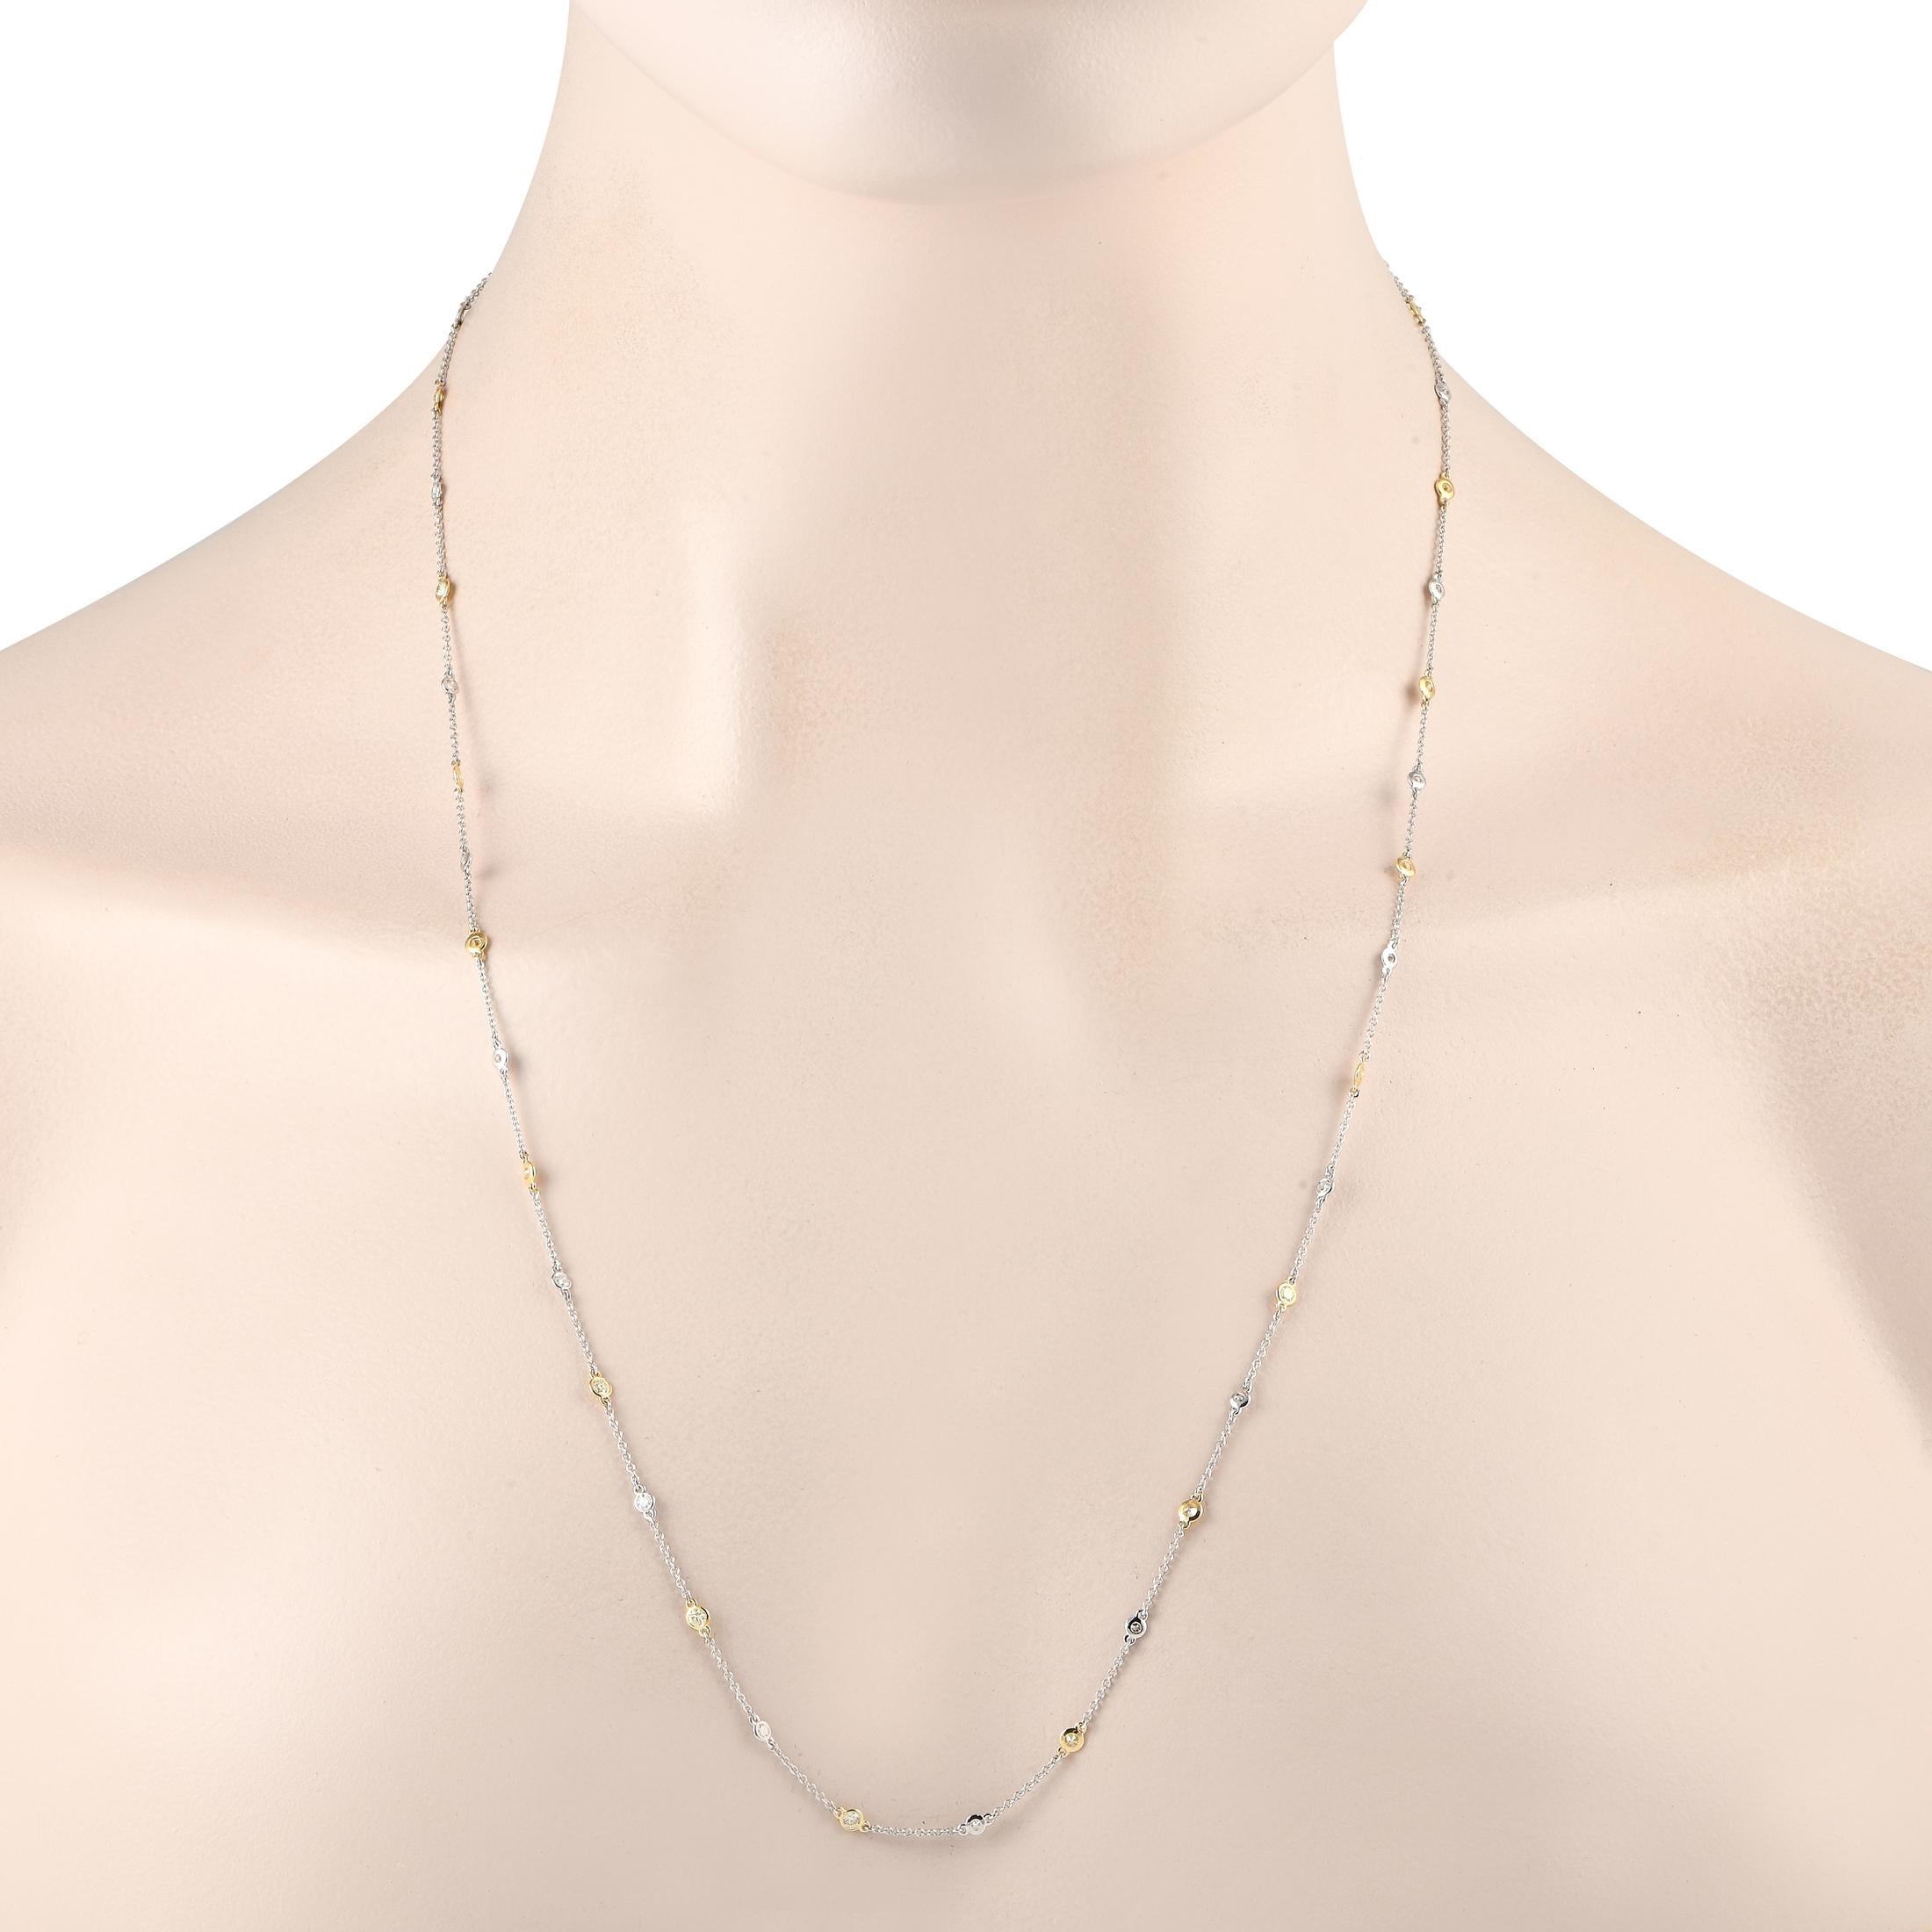 Instantly and effortlessly add a touch of sophistication to any look with this two-toned station necklace. It has a 24-long white gold chain accented with diamonds on stations. Each sparkling gem is set on either a yellow gold or white gold bezel.